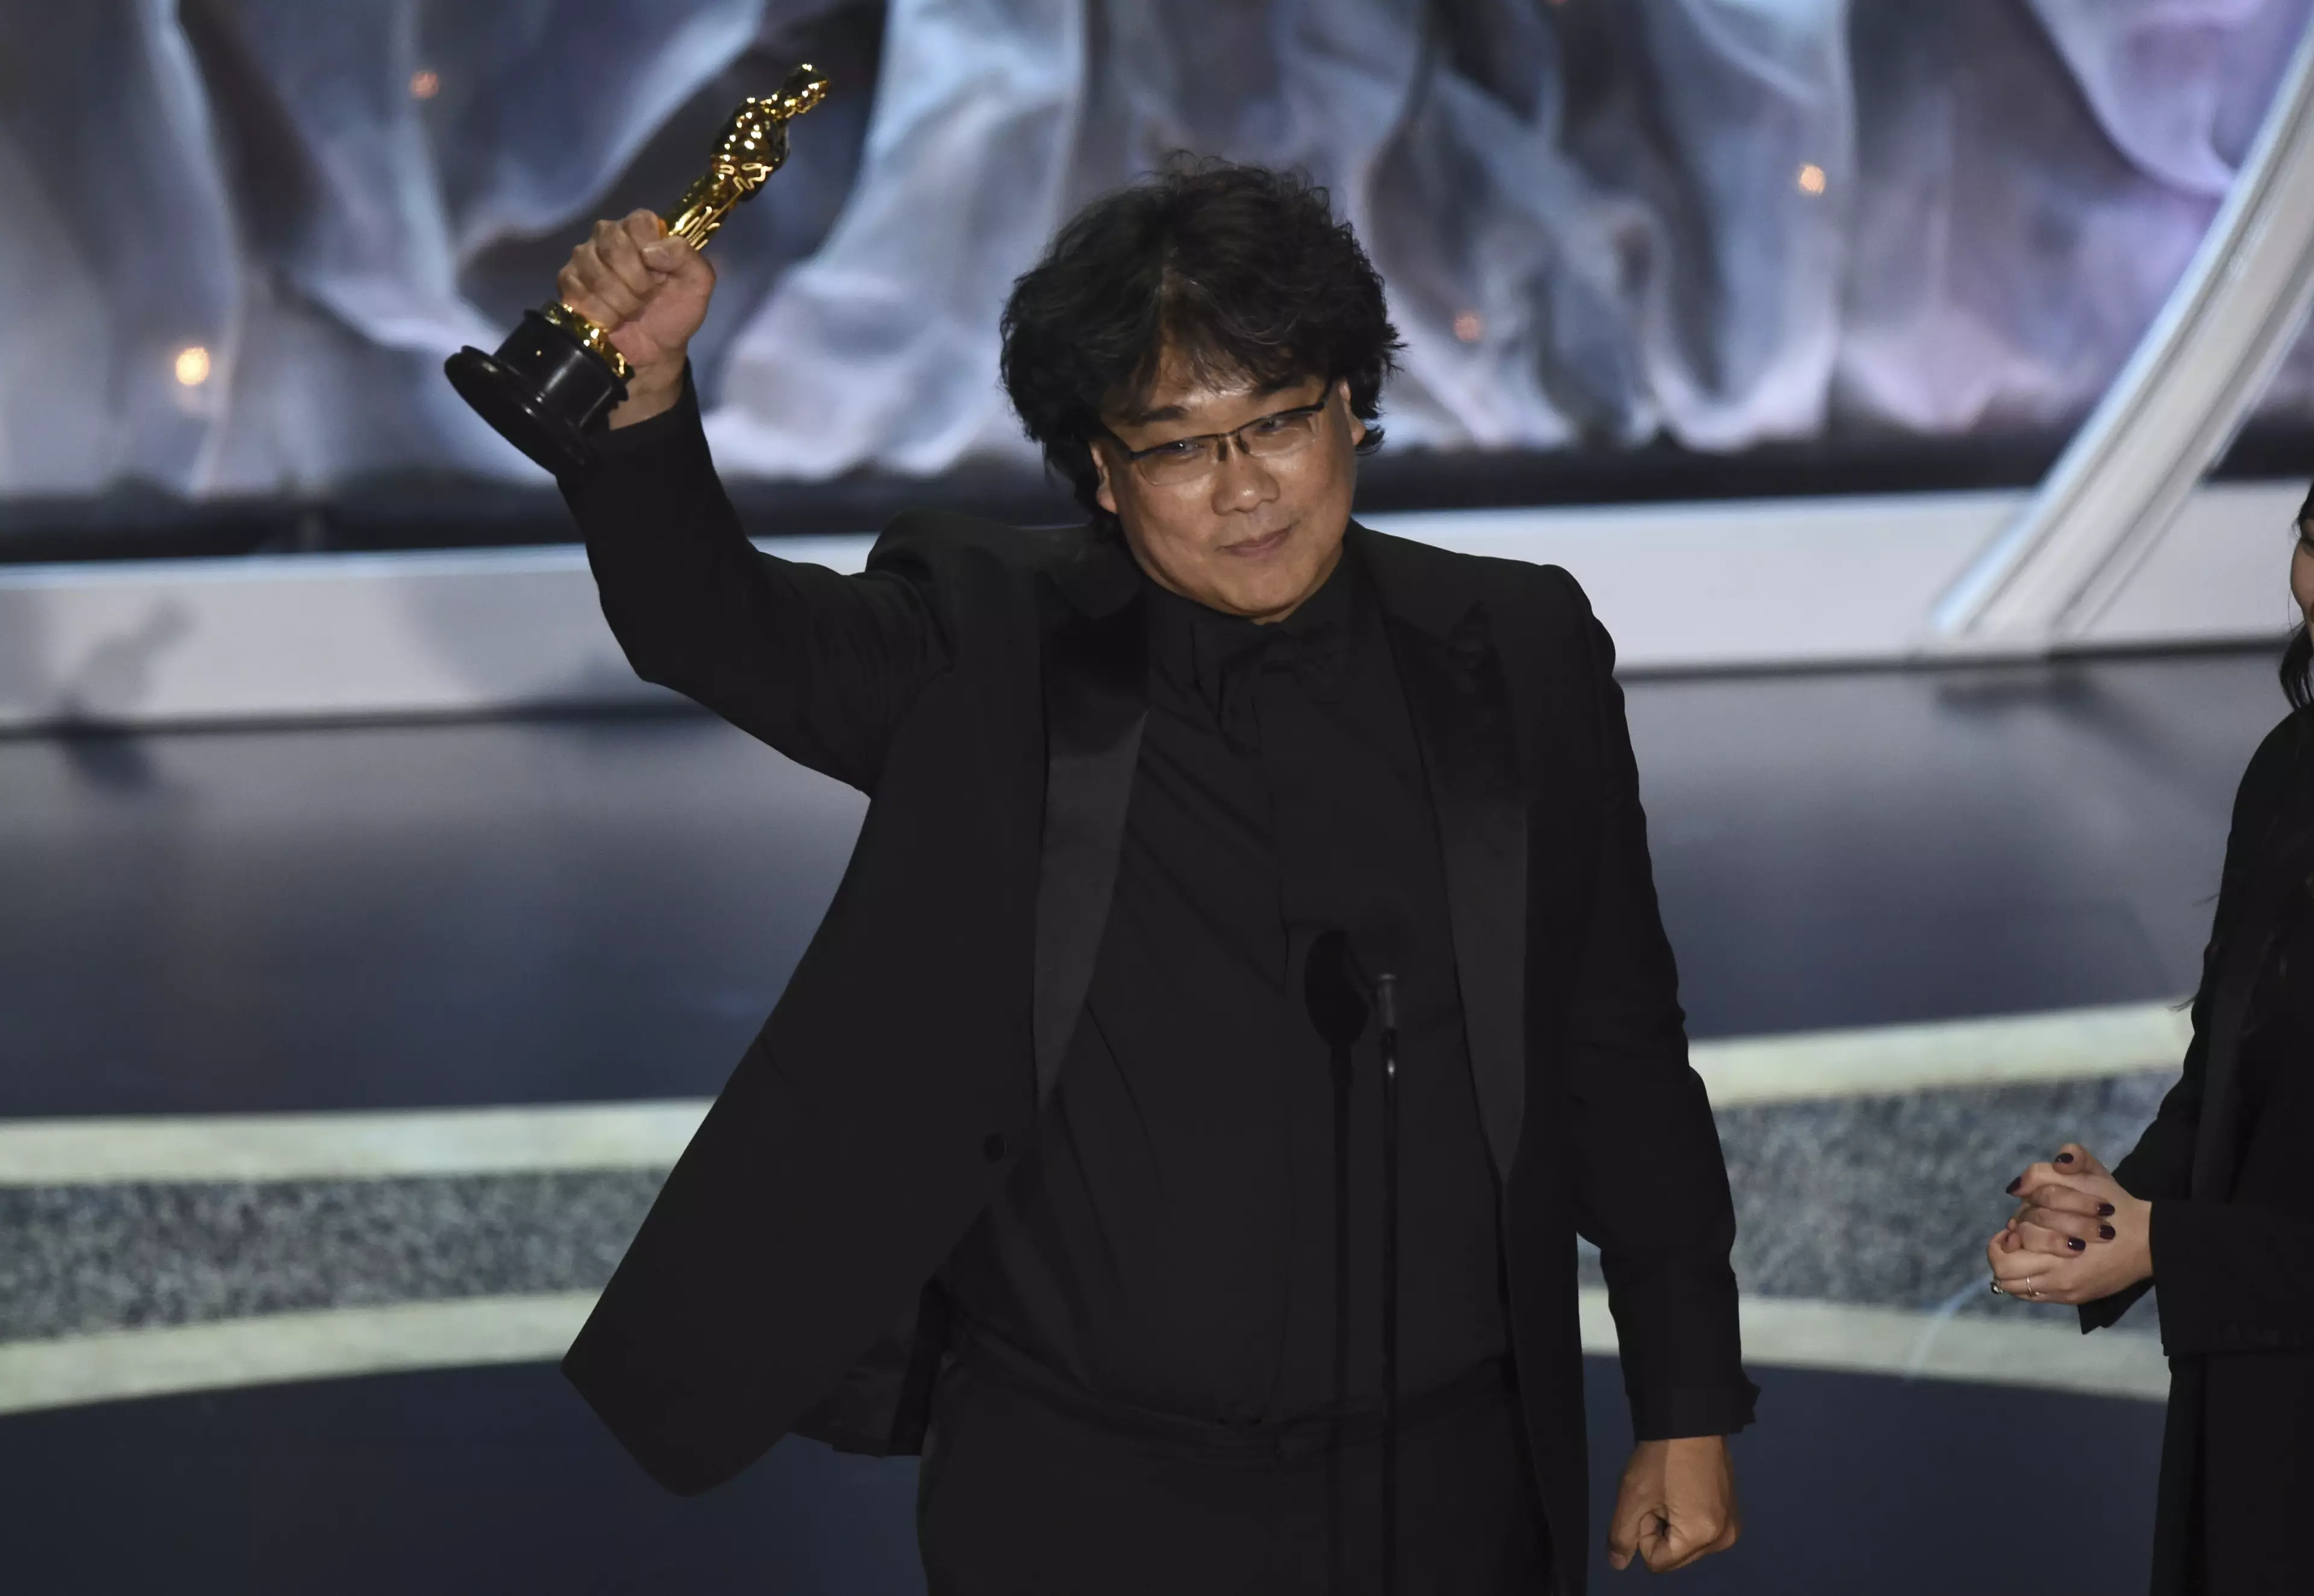 Bong Joon-ho collected his award for Best Director.